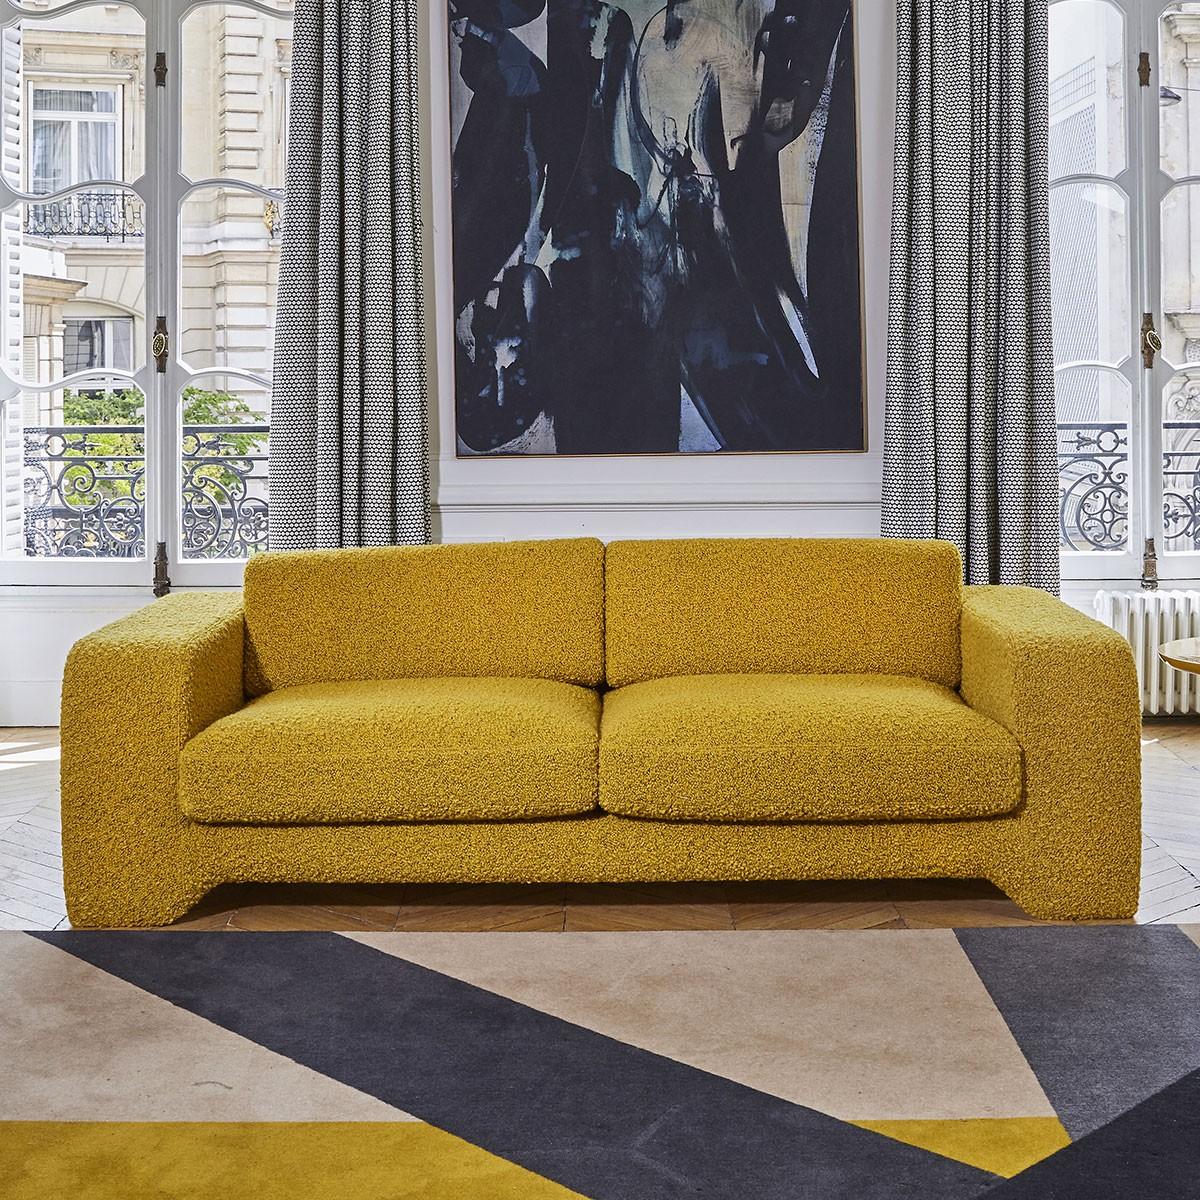 Popus Editions Giovanna 4 seater sofa in Beige Verone Velvet Upholstery

Giovanna is a sofa with a strong profile. A sober, plush line, with this famous detail that changes everything, so as not to forget its strength of character and this